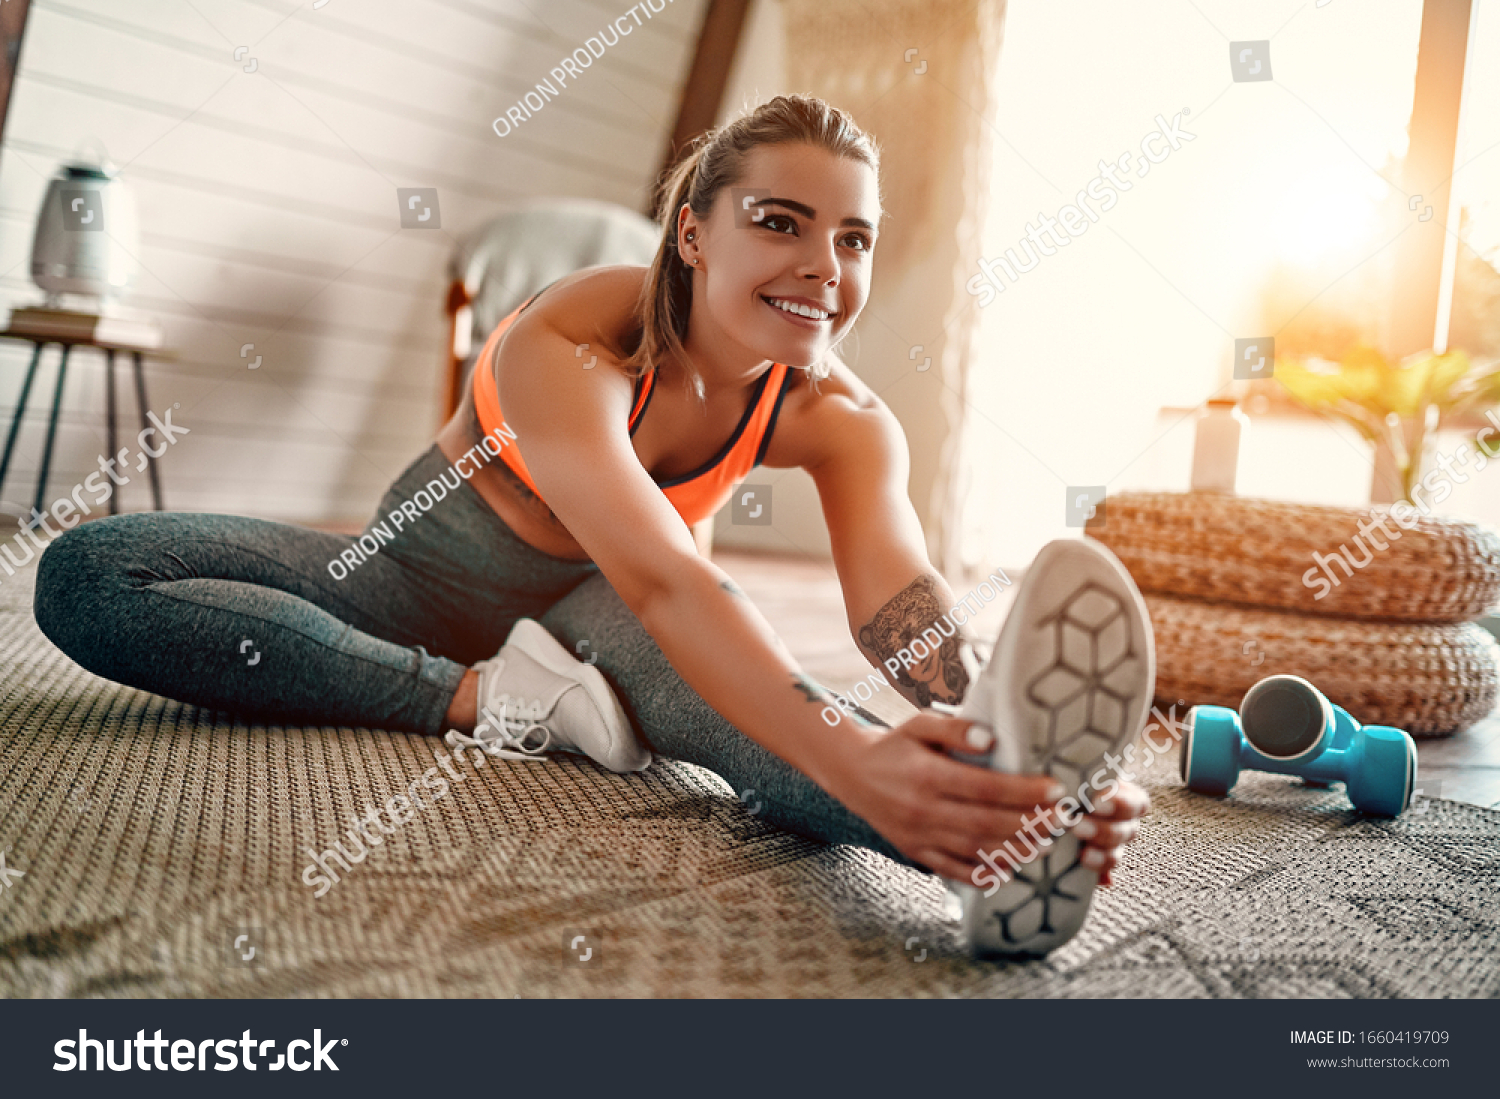 Athletic woman in sportswear doing fitness stretching exercises at home in the living room. Sport and recreation concept. #1660419709